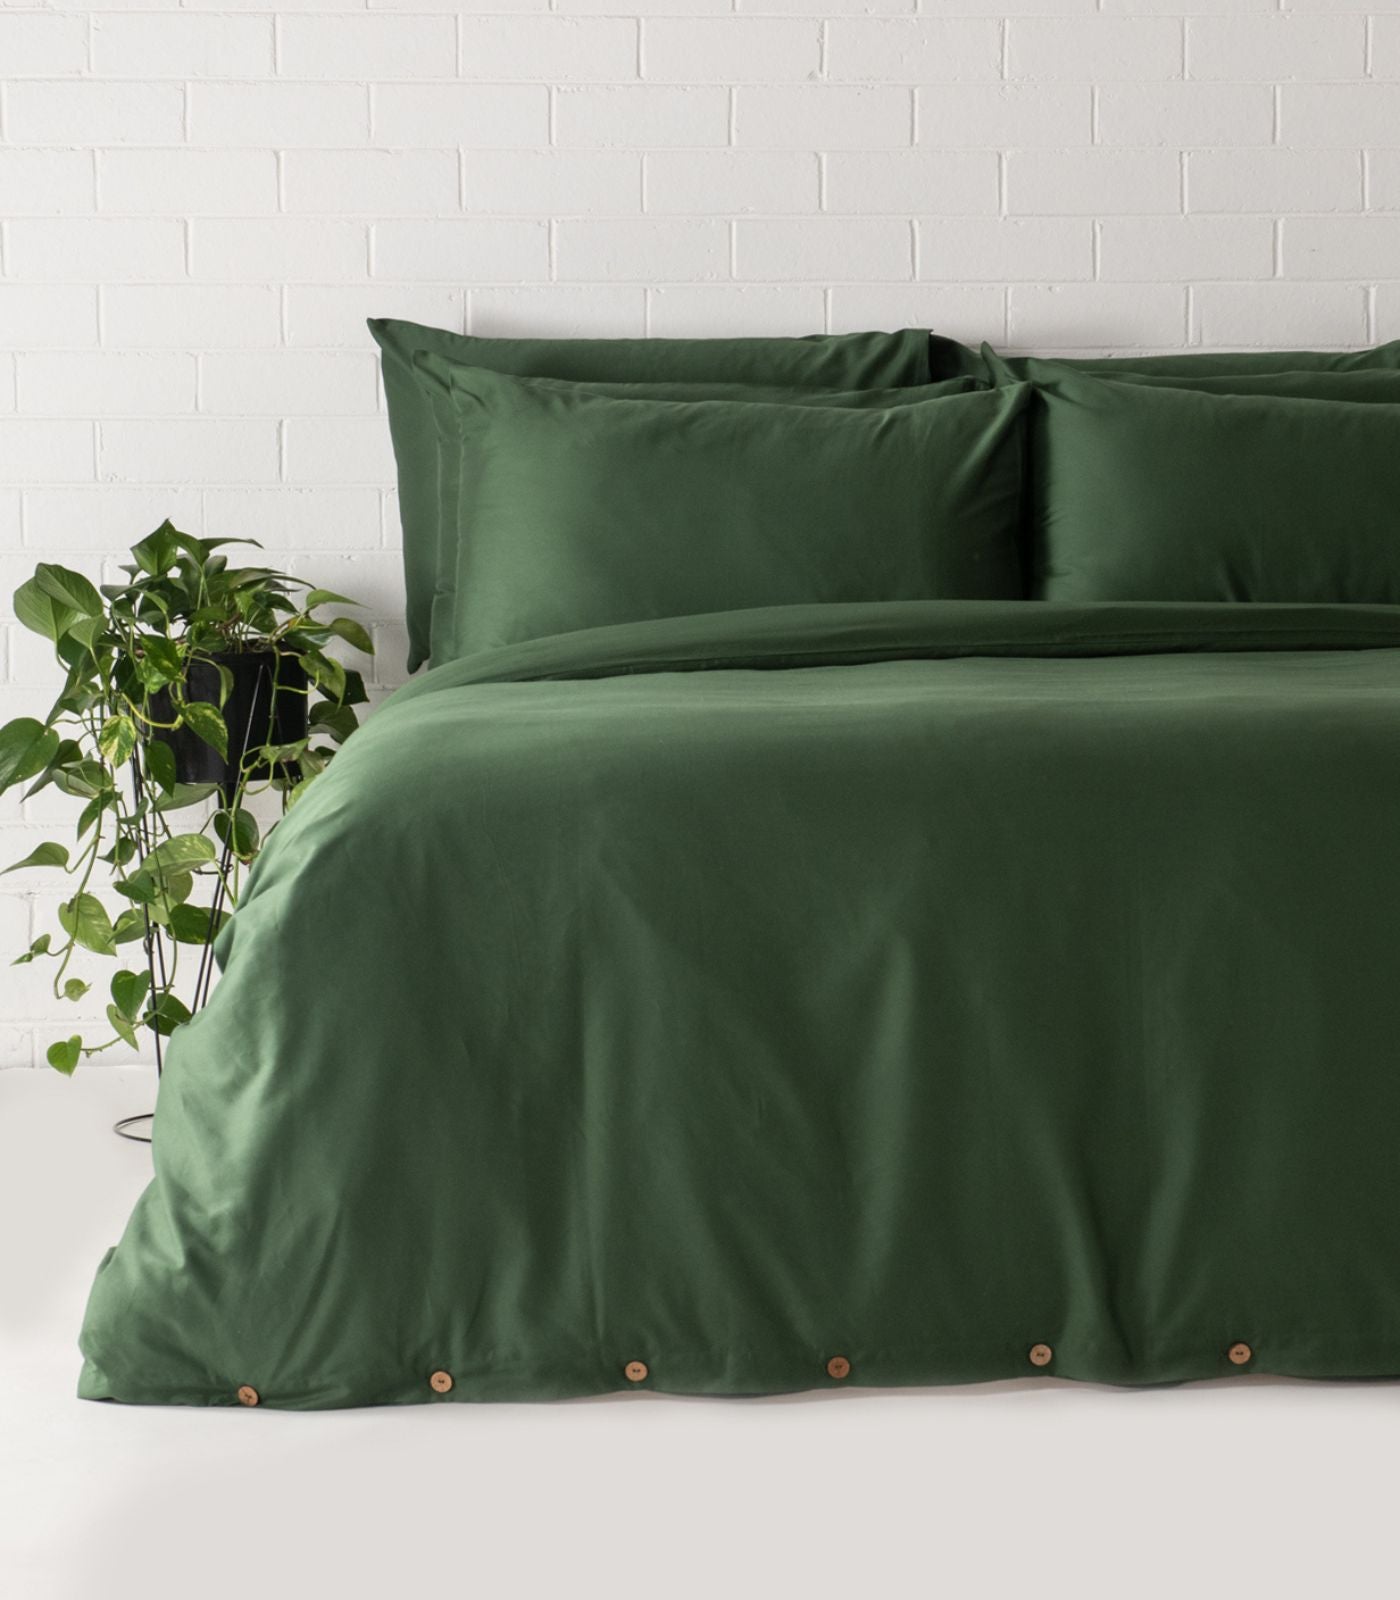 Bhumi Organic Cotton - Sateen Plain Quilt Cover Set - Forest Green